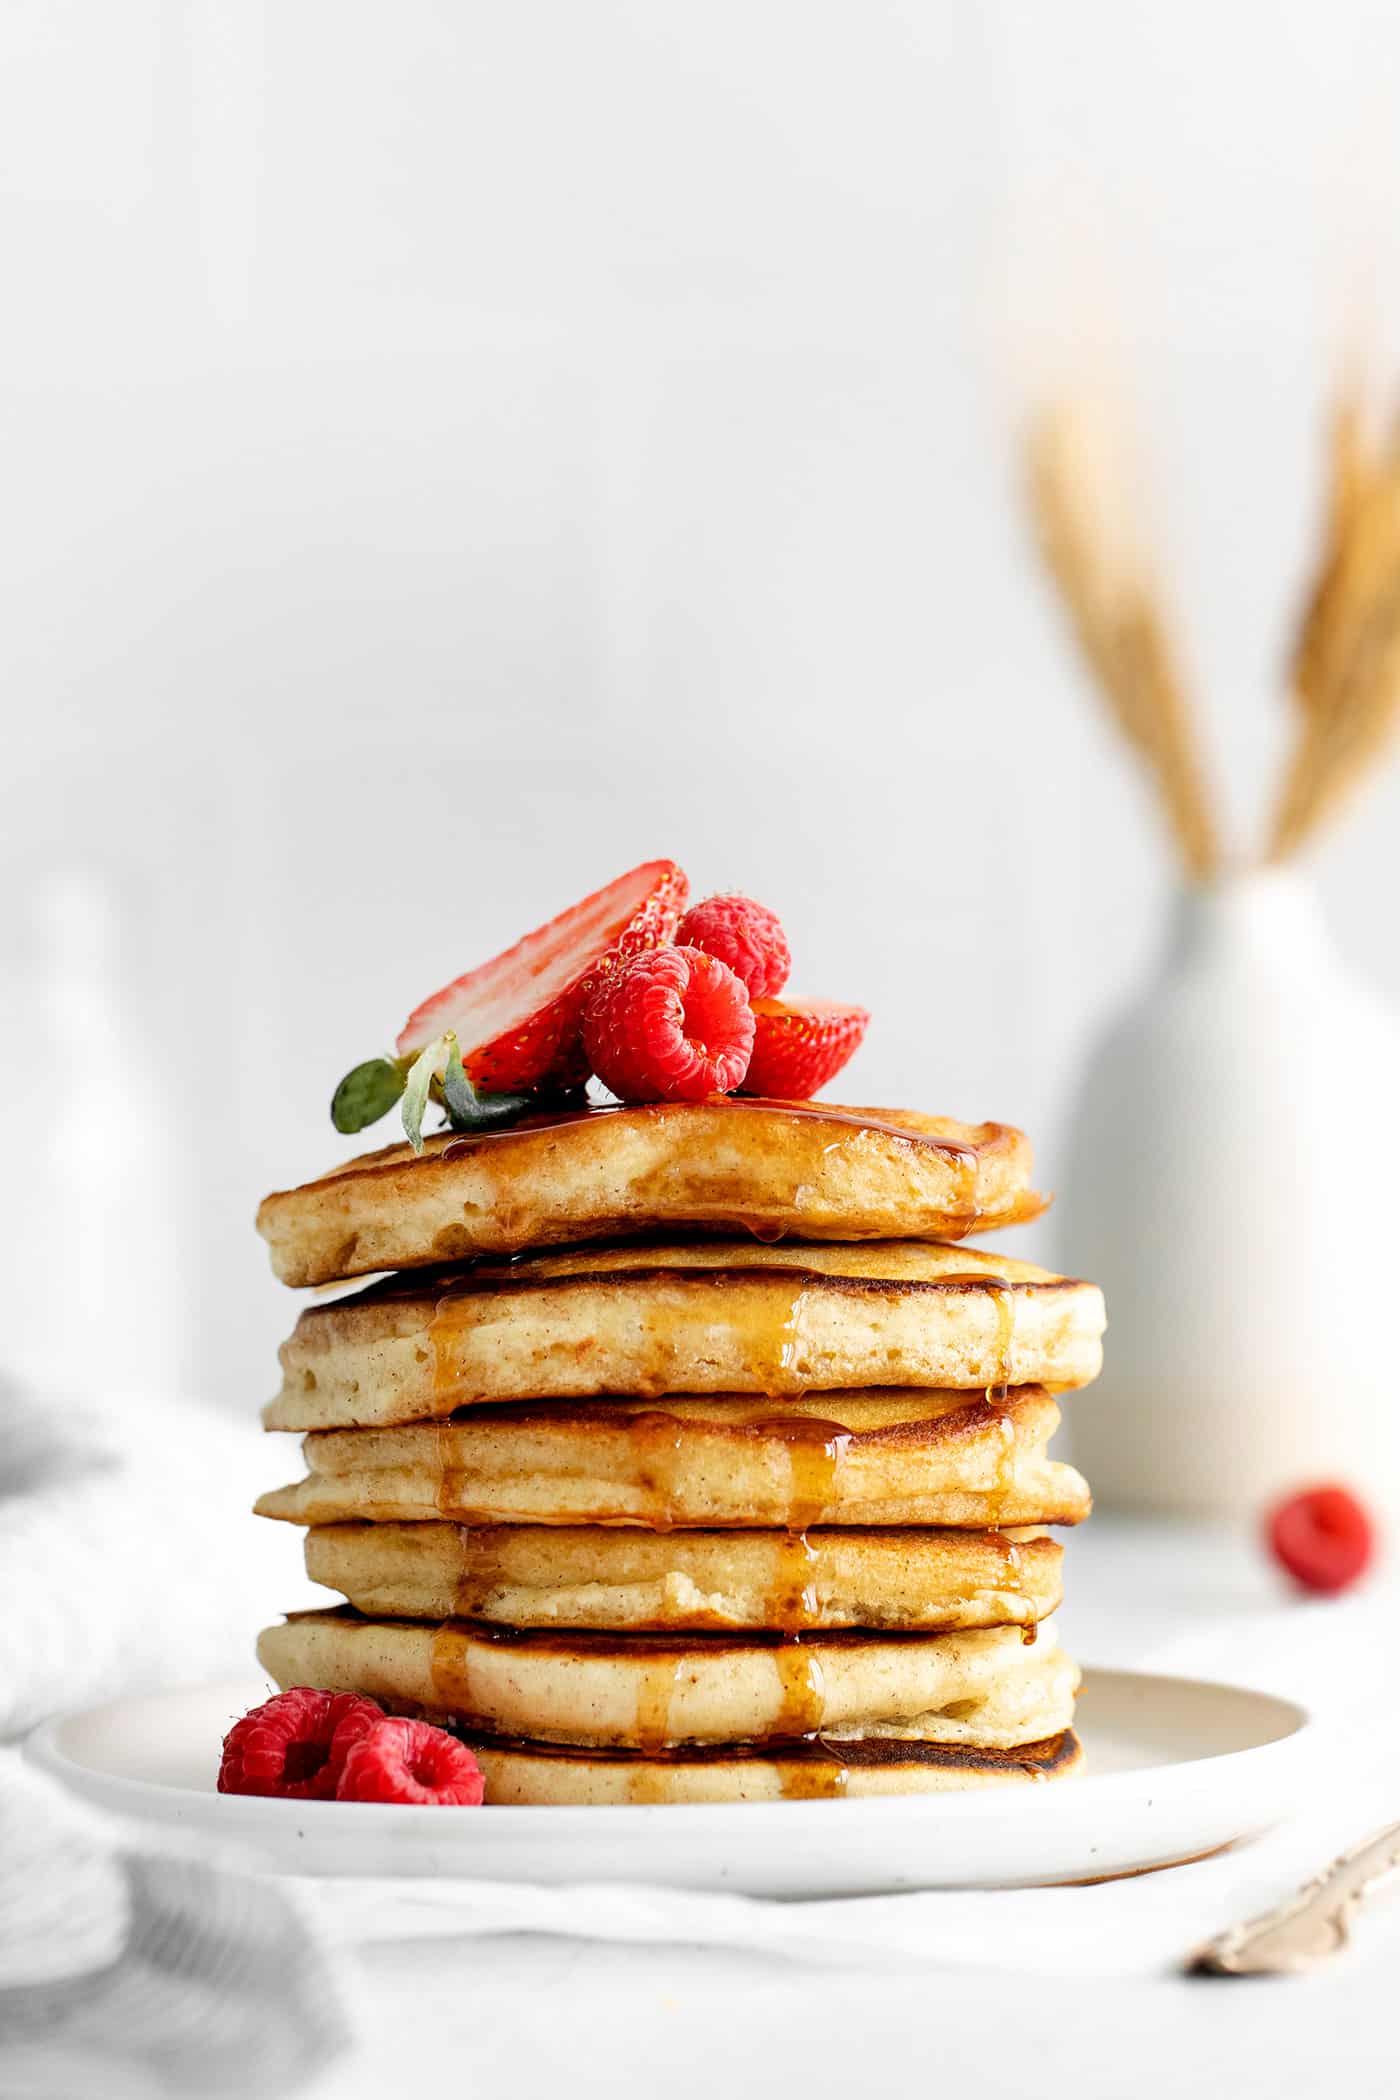 A stack of buttermilk pancakes topped with strawberries